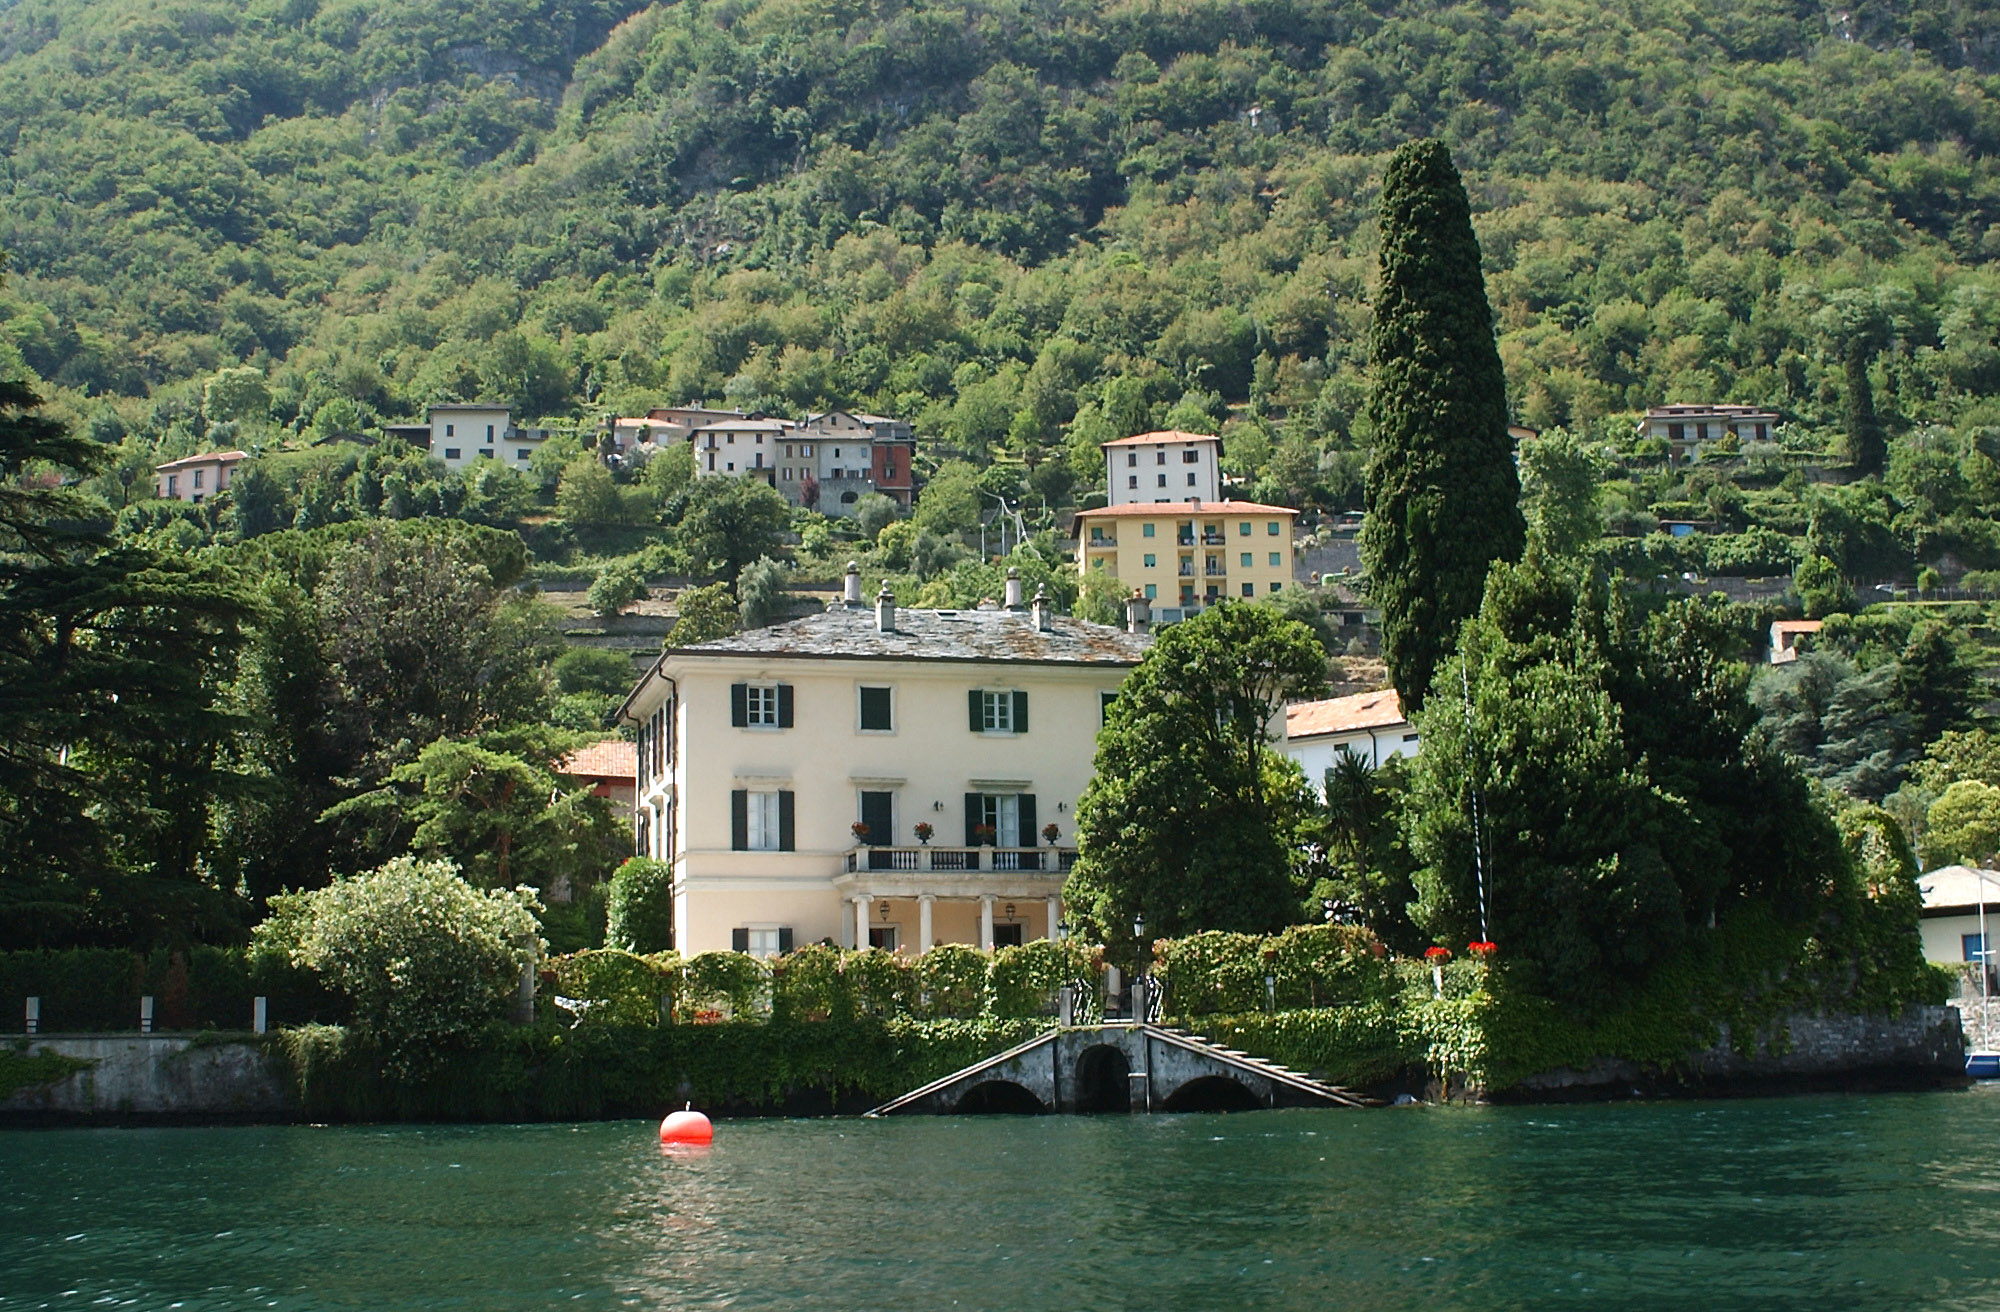 A lakeside view of George Clooney's villa Oleandra on Lake Como, northern Italy, taken Thursday, July 8, 2004.